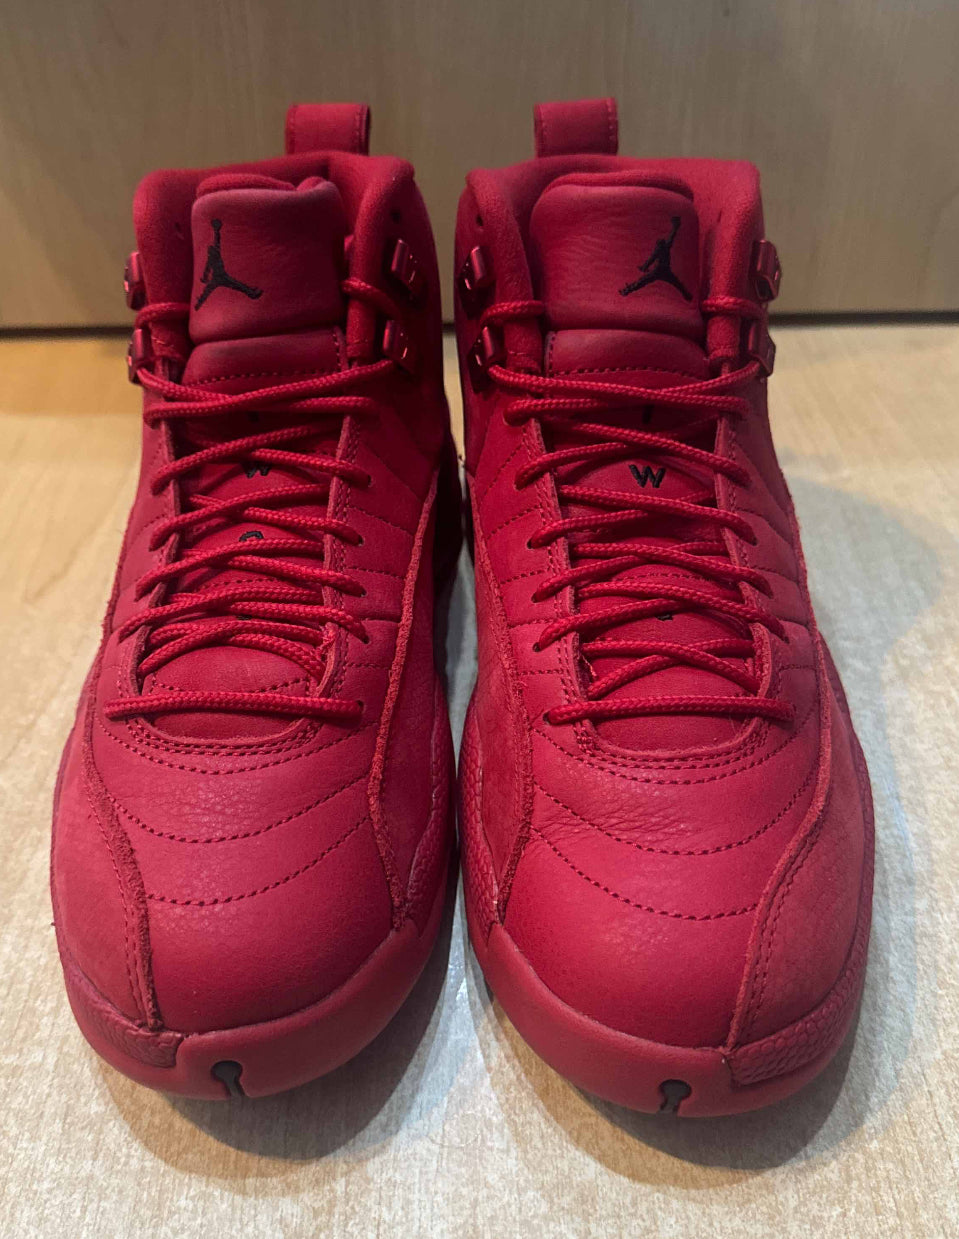 Gym Red 12s Size 8